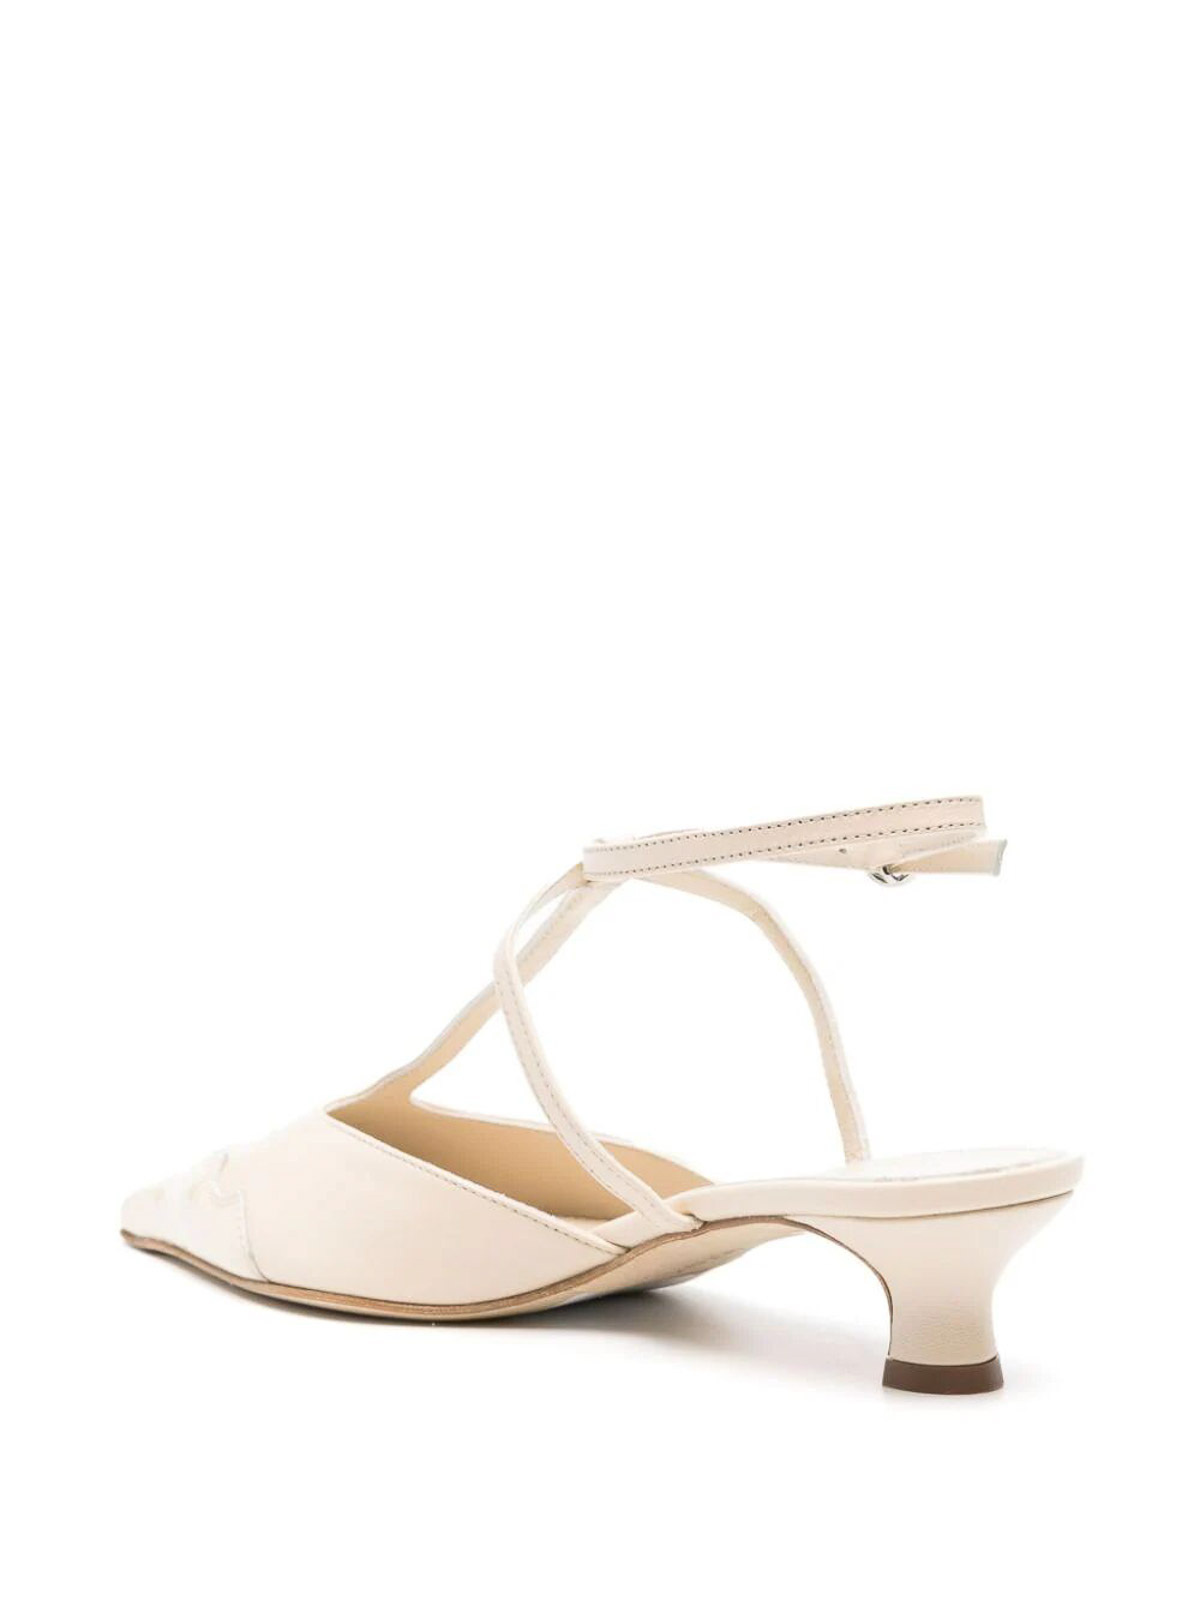 Shop Aeyde Nappa Shoes In Nude & Neutrals